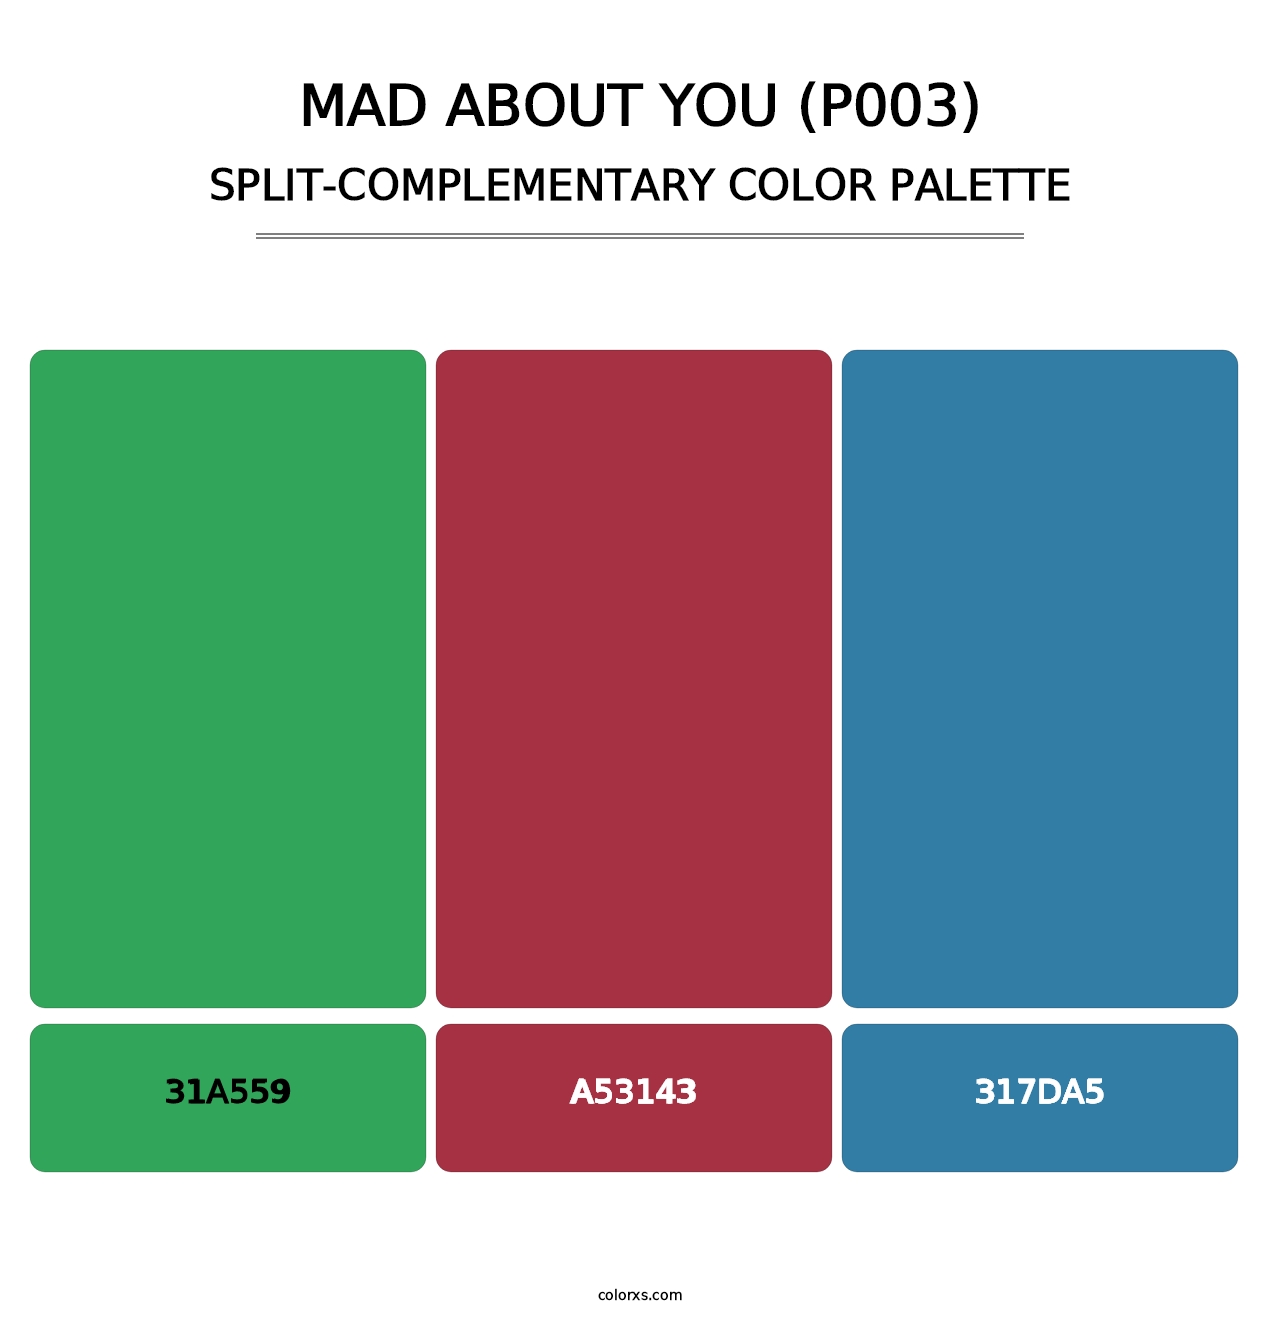 Mad About You (P003) - Split-Complementary Color Palette